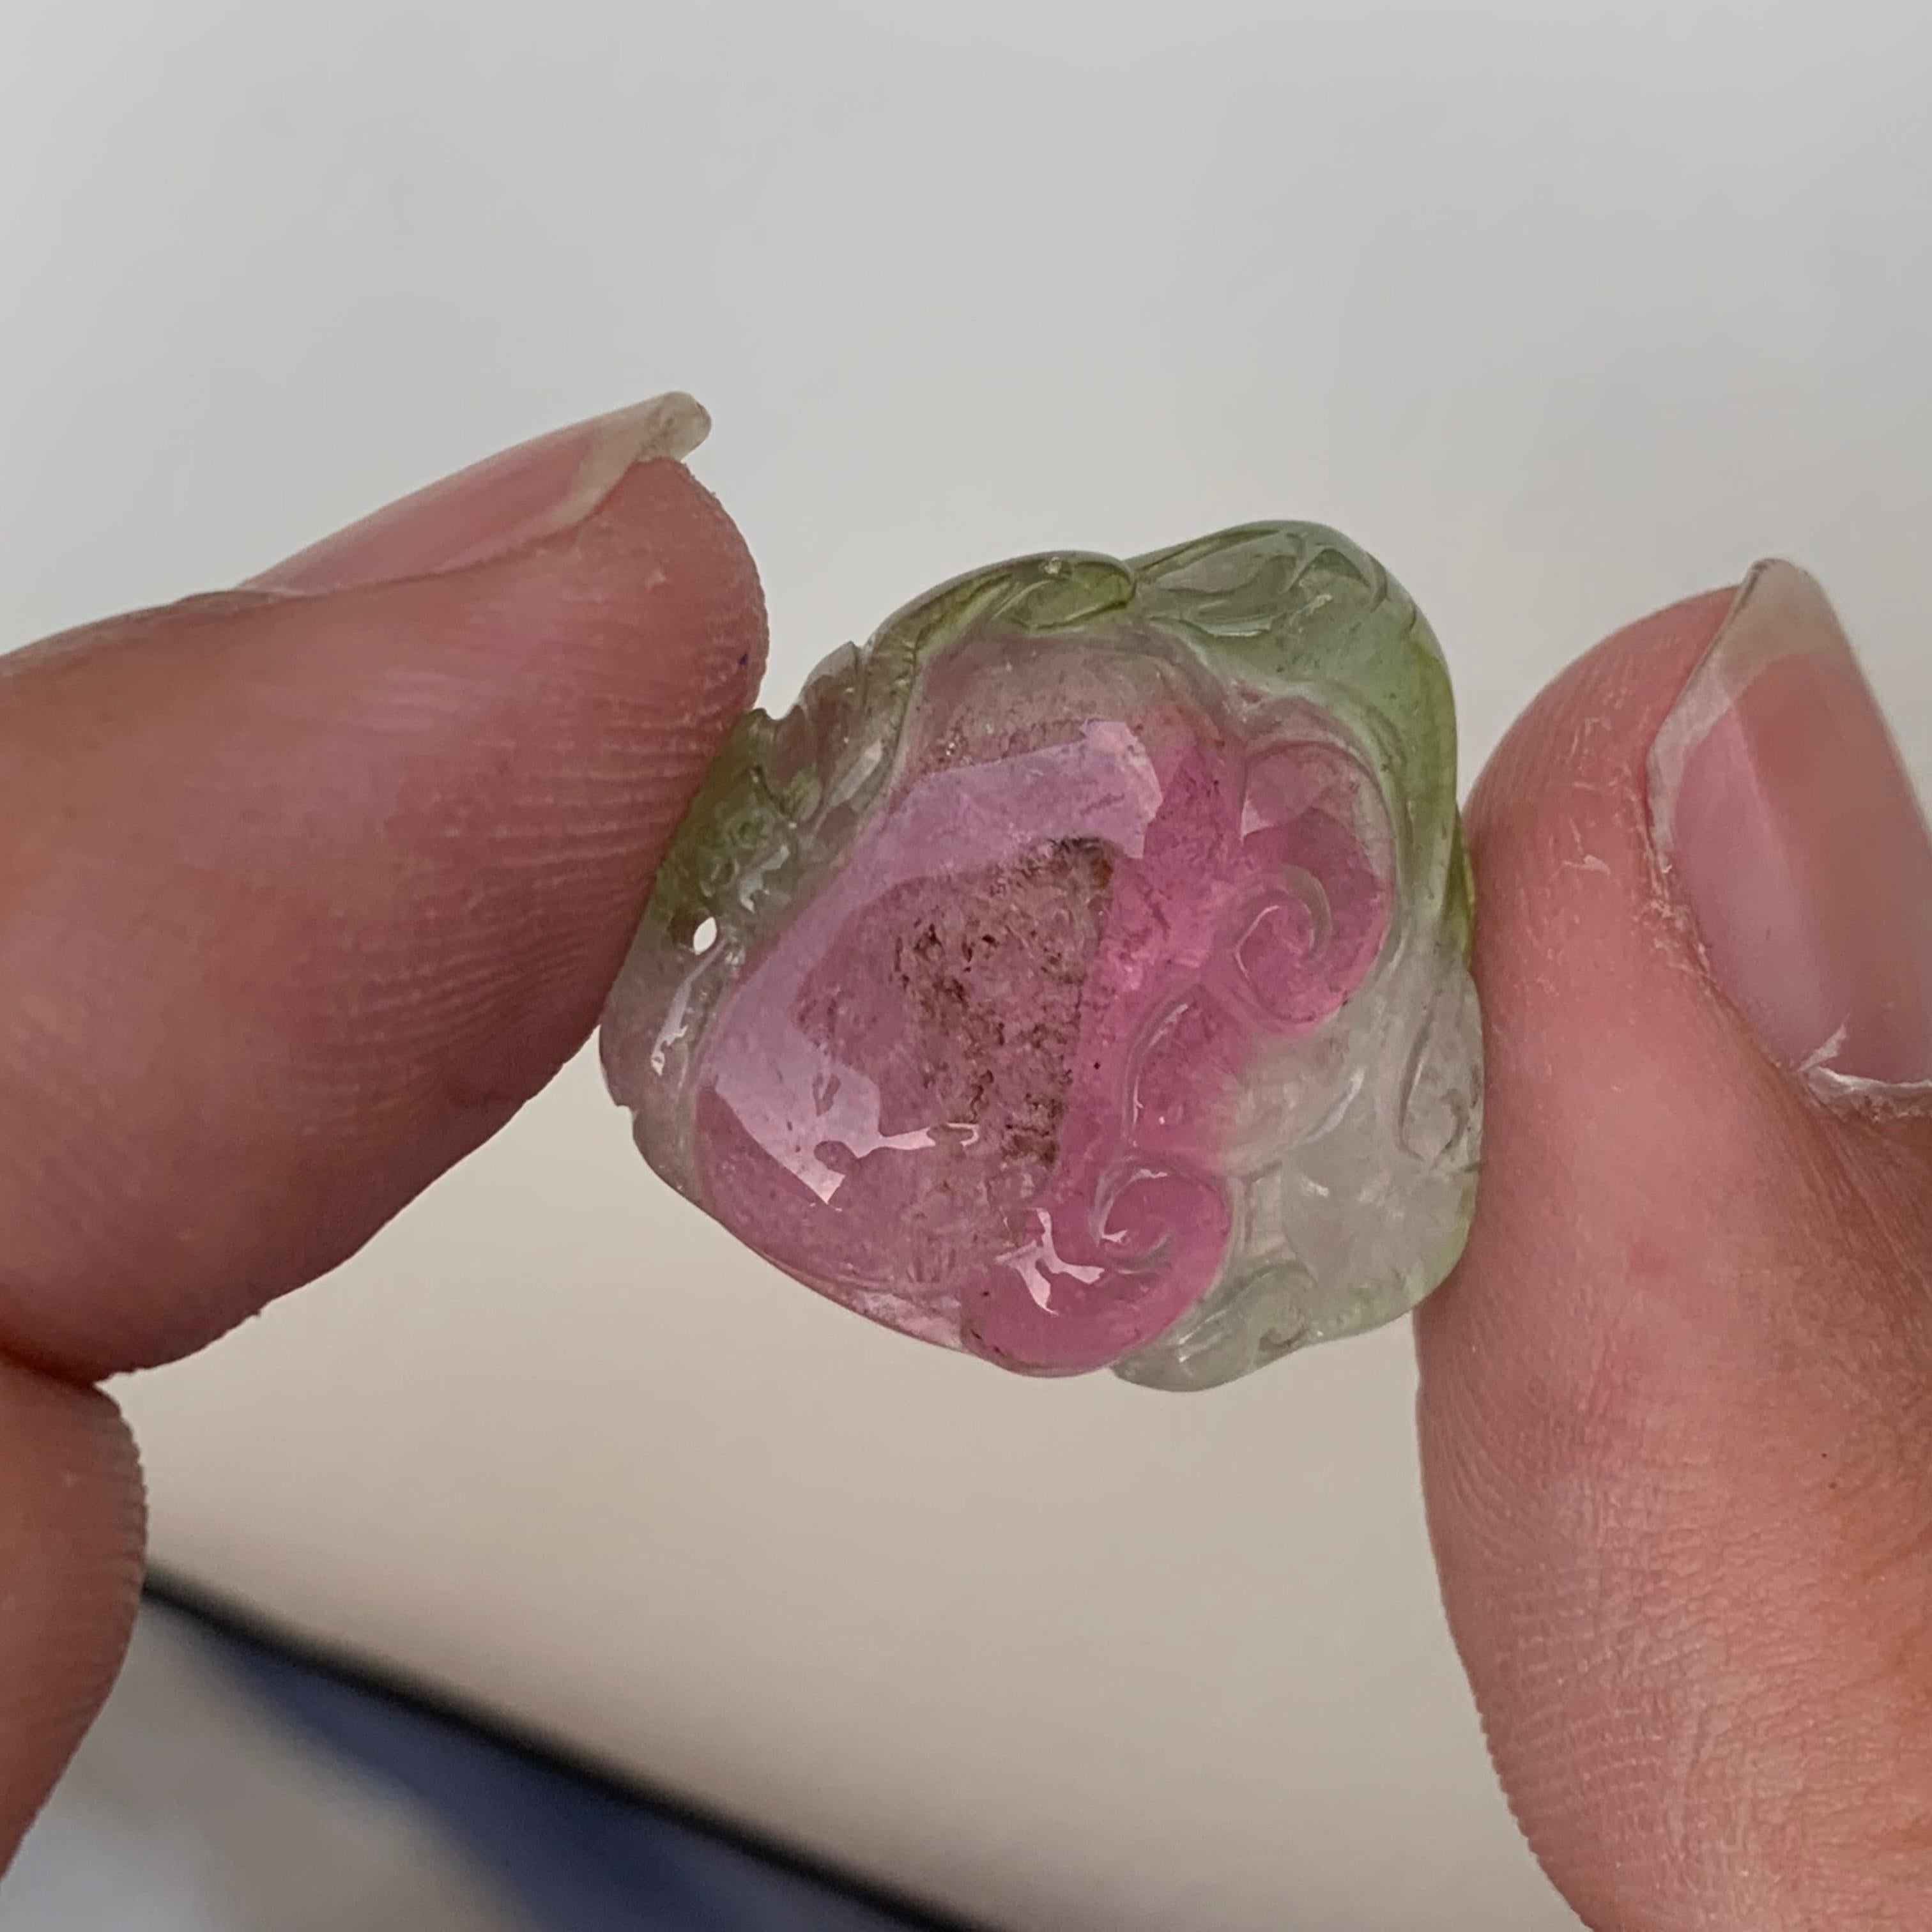 Lovely Loose Water Melon Color Tourmaline Carving From Africa 
WEIGHT: 24.10 Carat
DIMENSIONS: 2.1 x 1.8 x 0.7 Cm
ORIGIN: Madagascar, Africa 
TREATMENT : None

Tourmaline is an extremely popular gemstone; the name Tourmaline is derived from